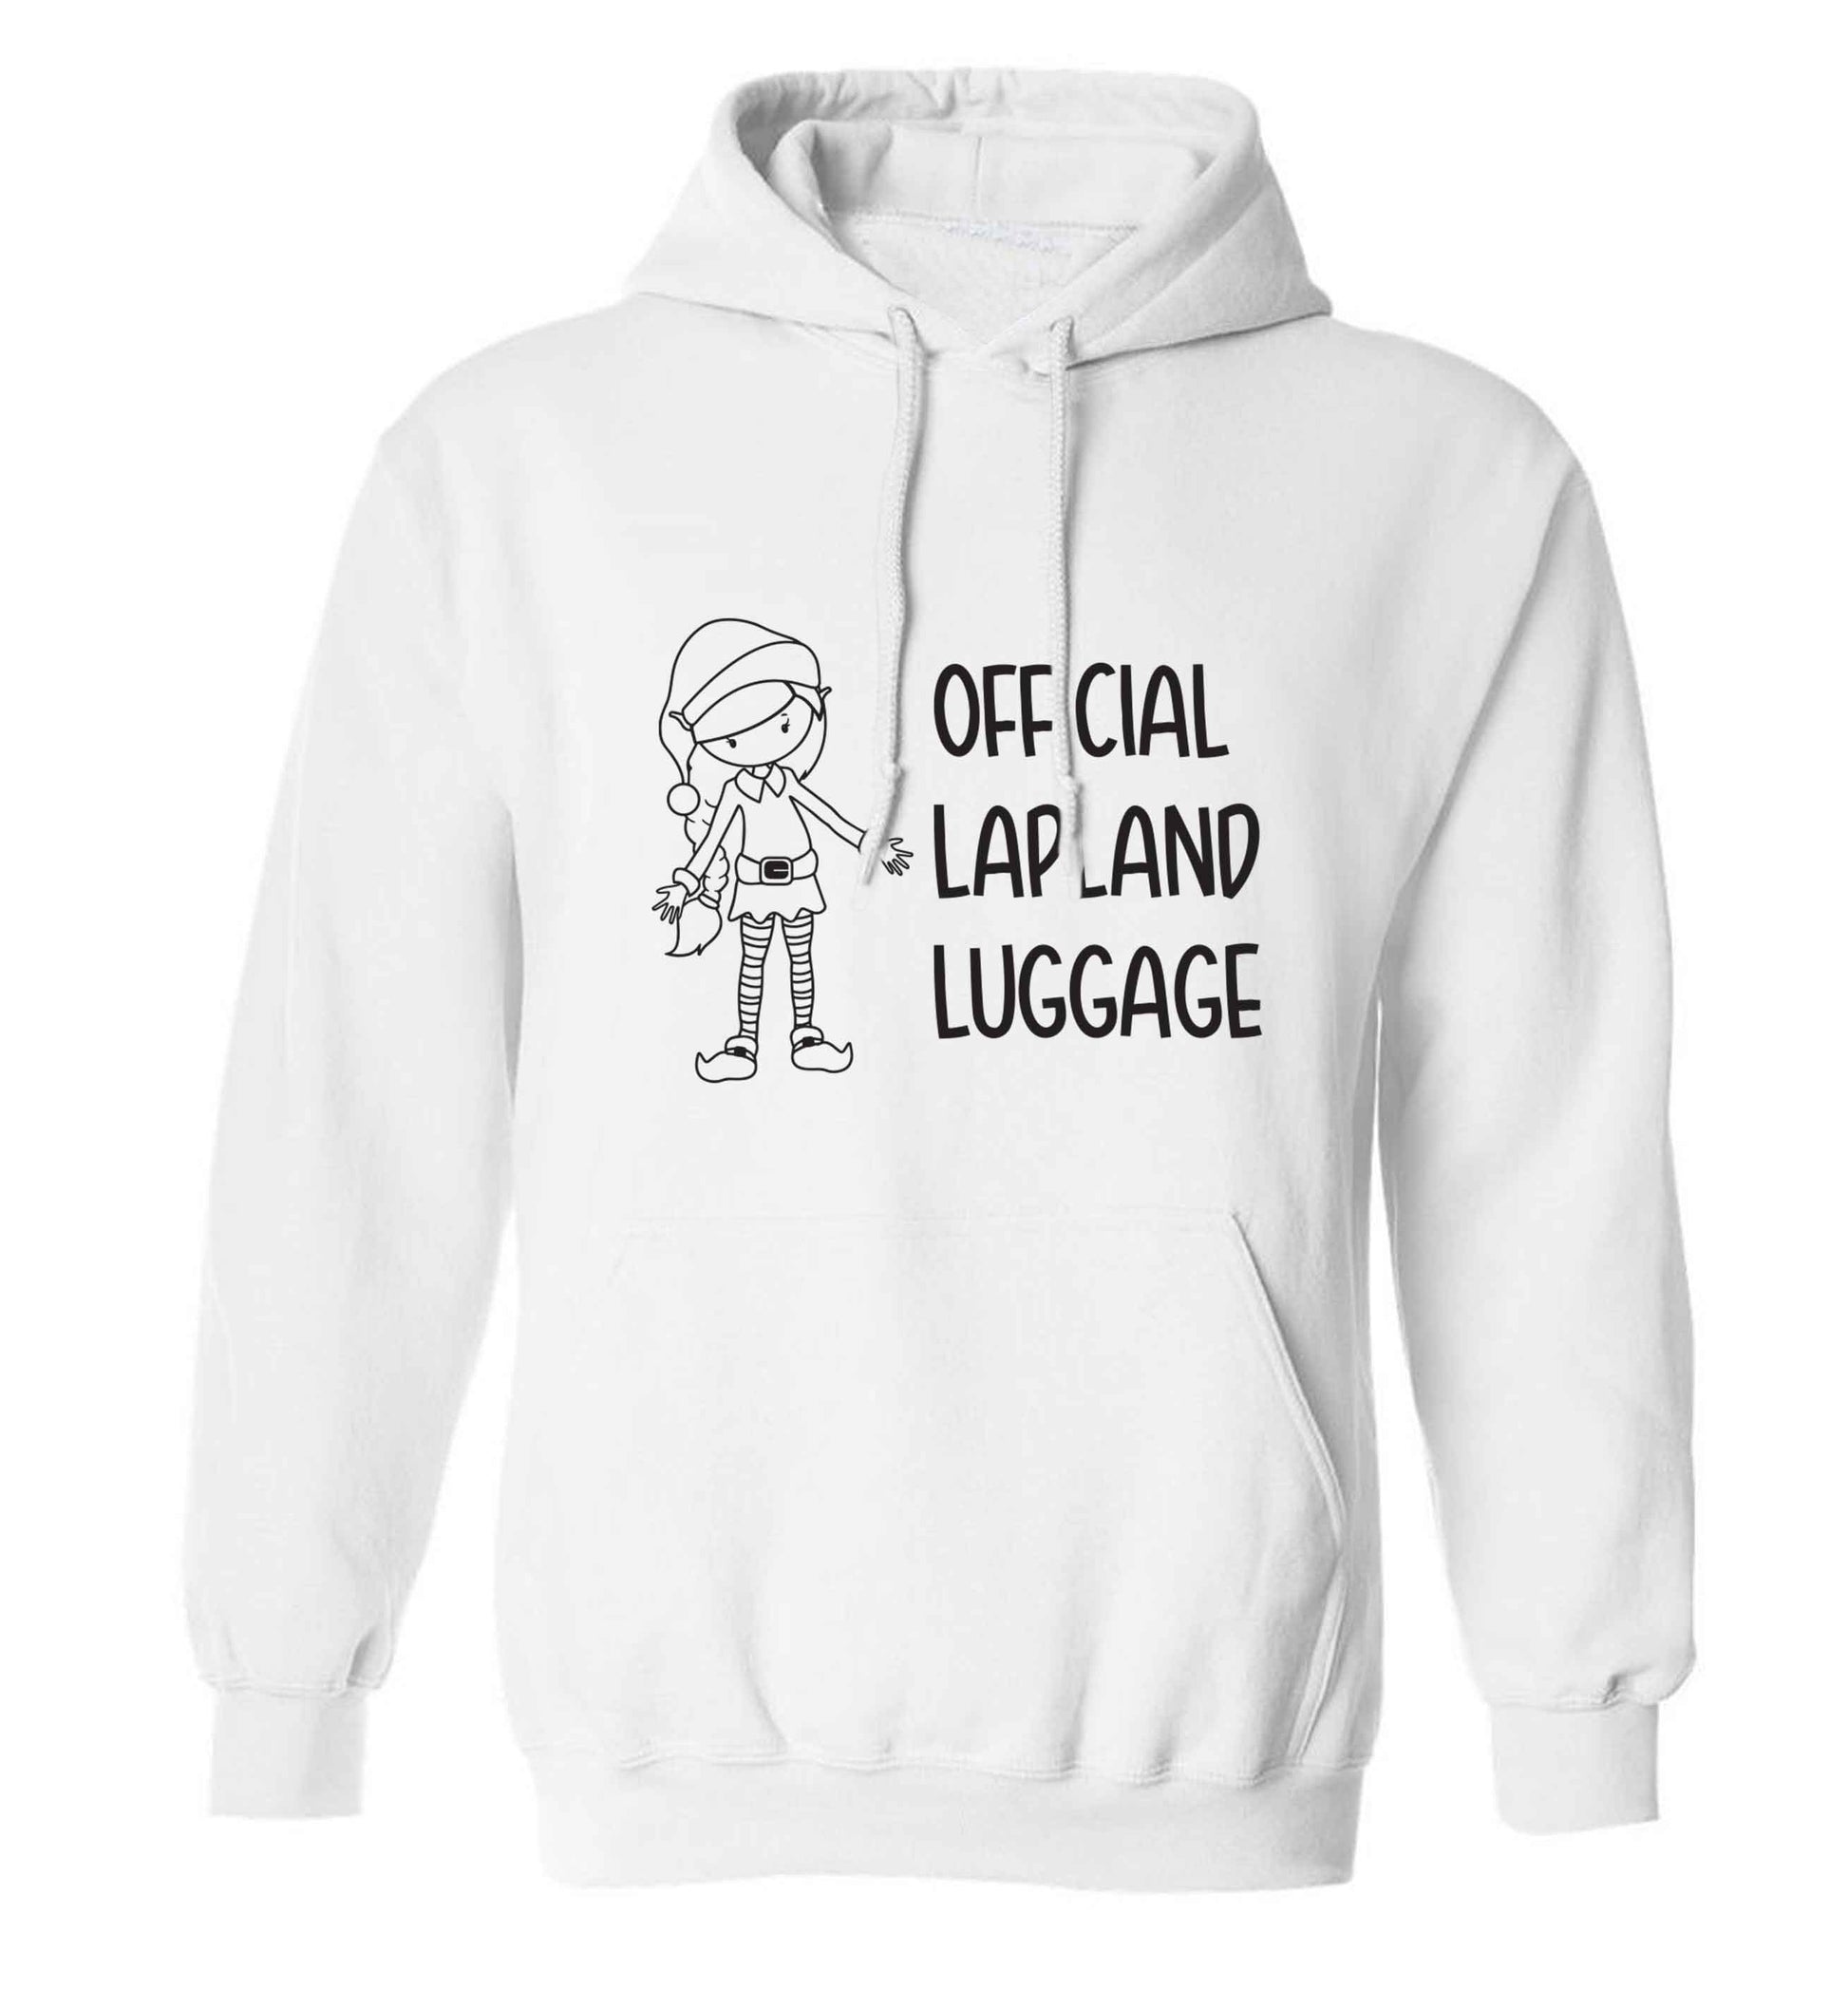 Official lapland luggage - Elf snowflake adults unisex white hoodie 2XL